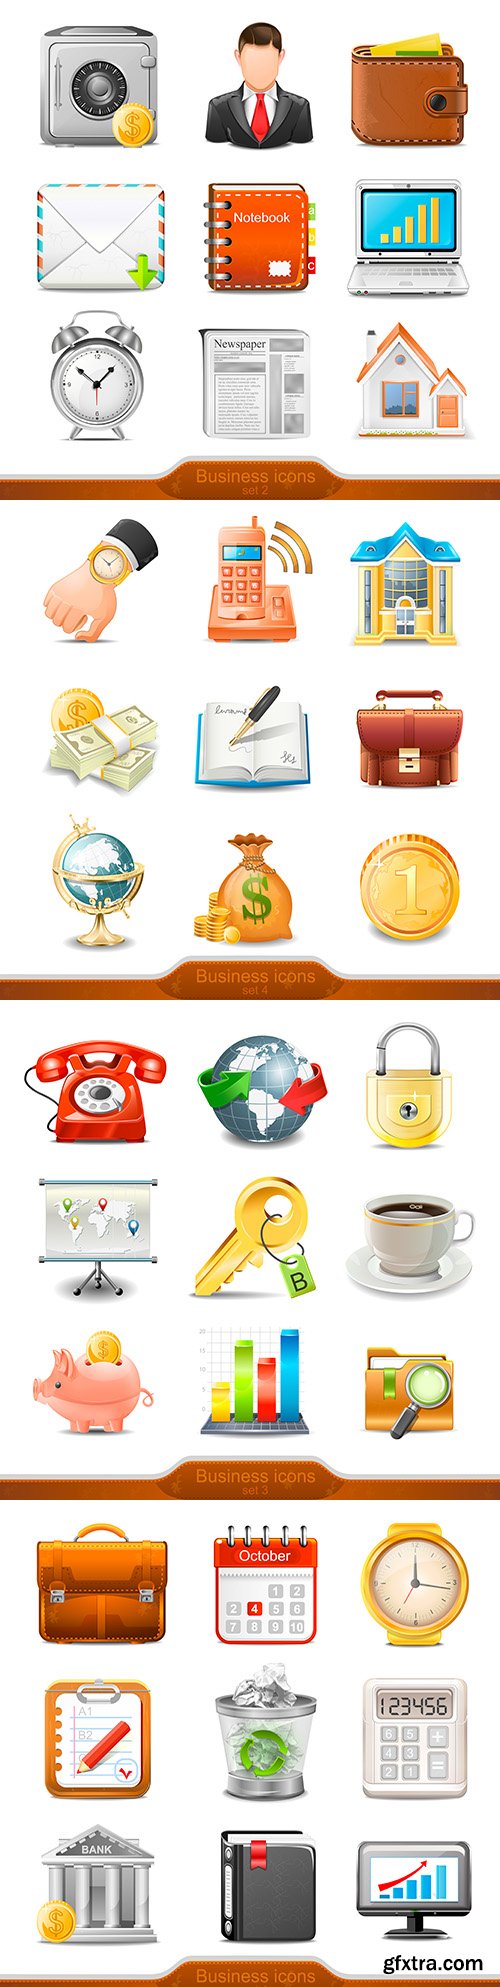 Business and men \'s accessories for business set of icons